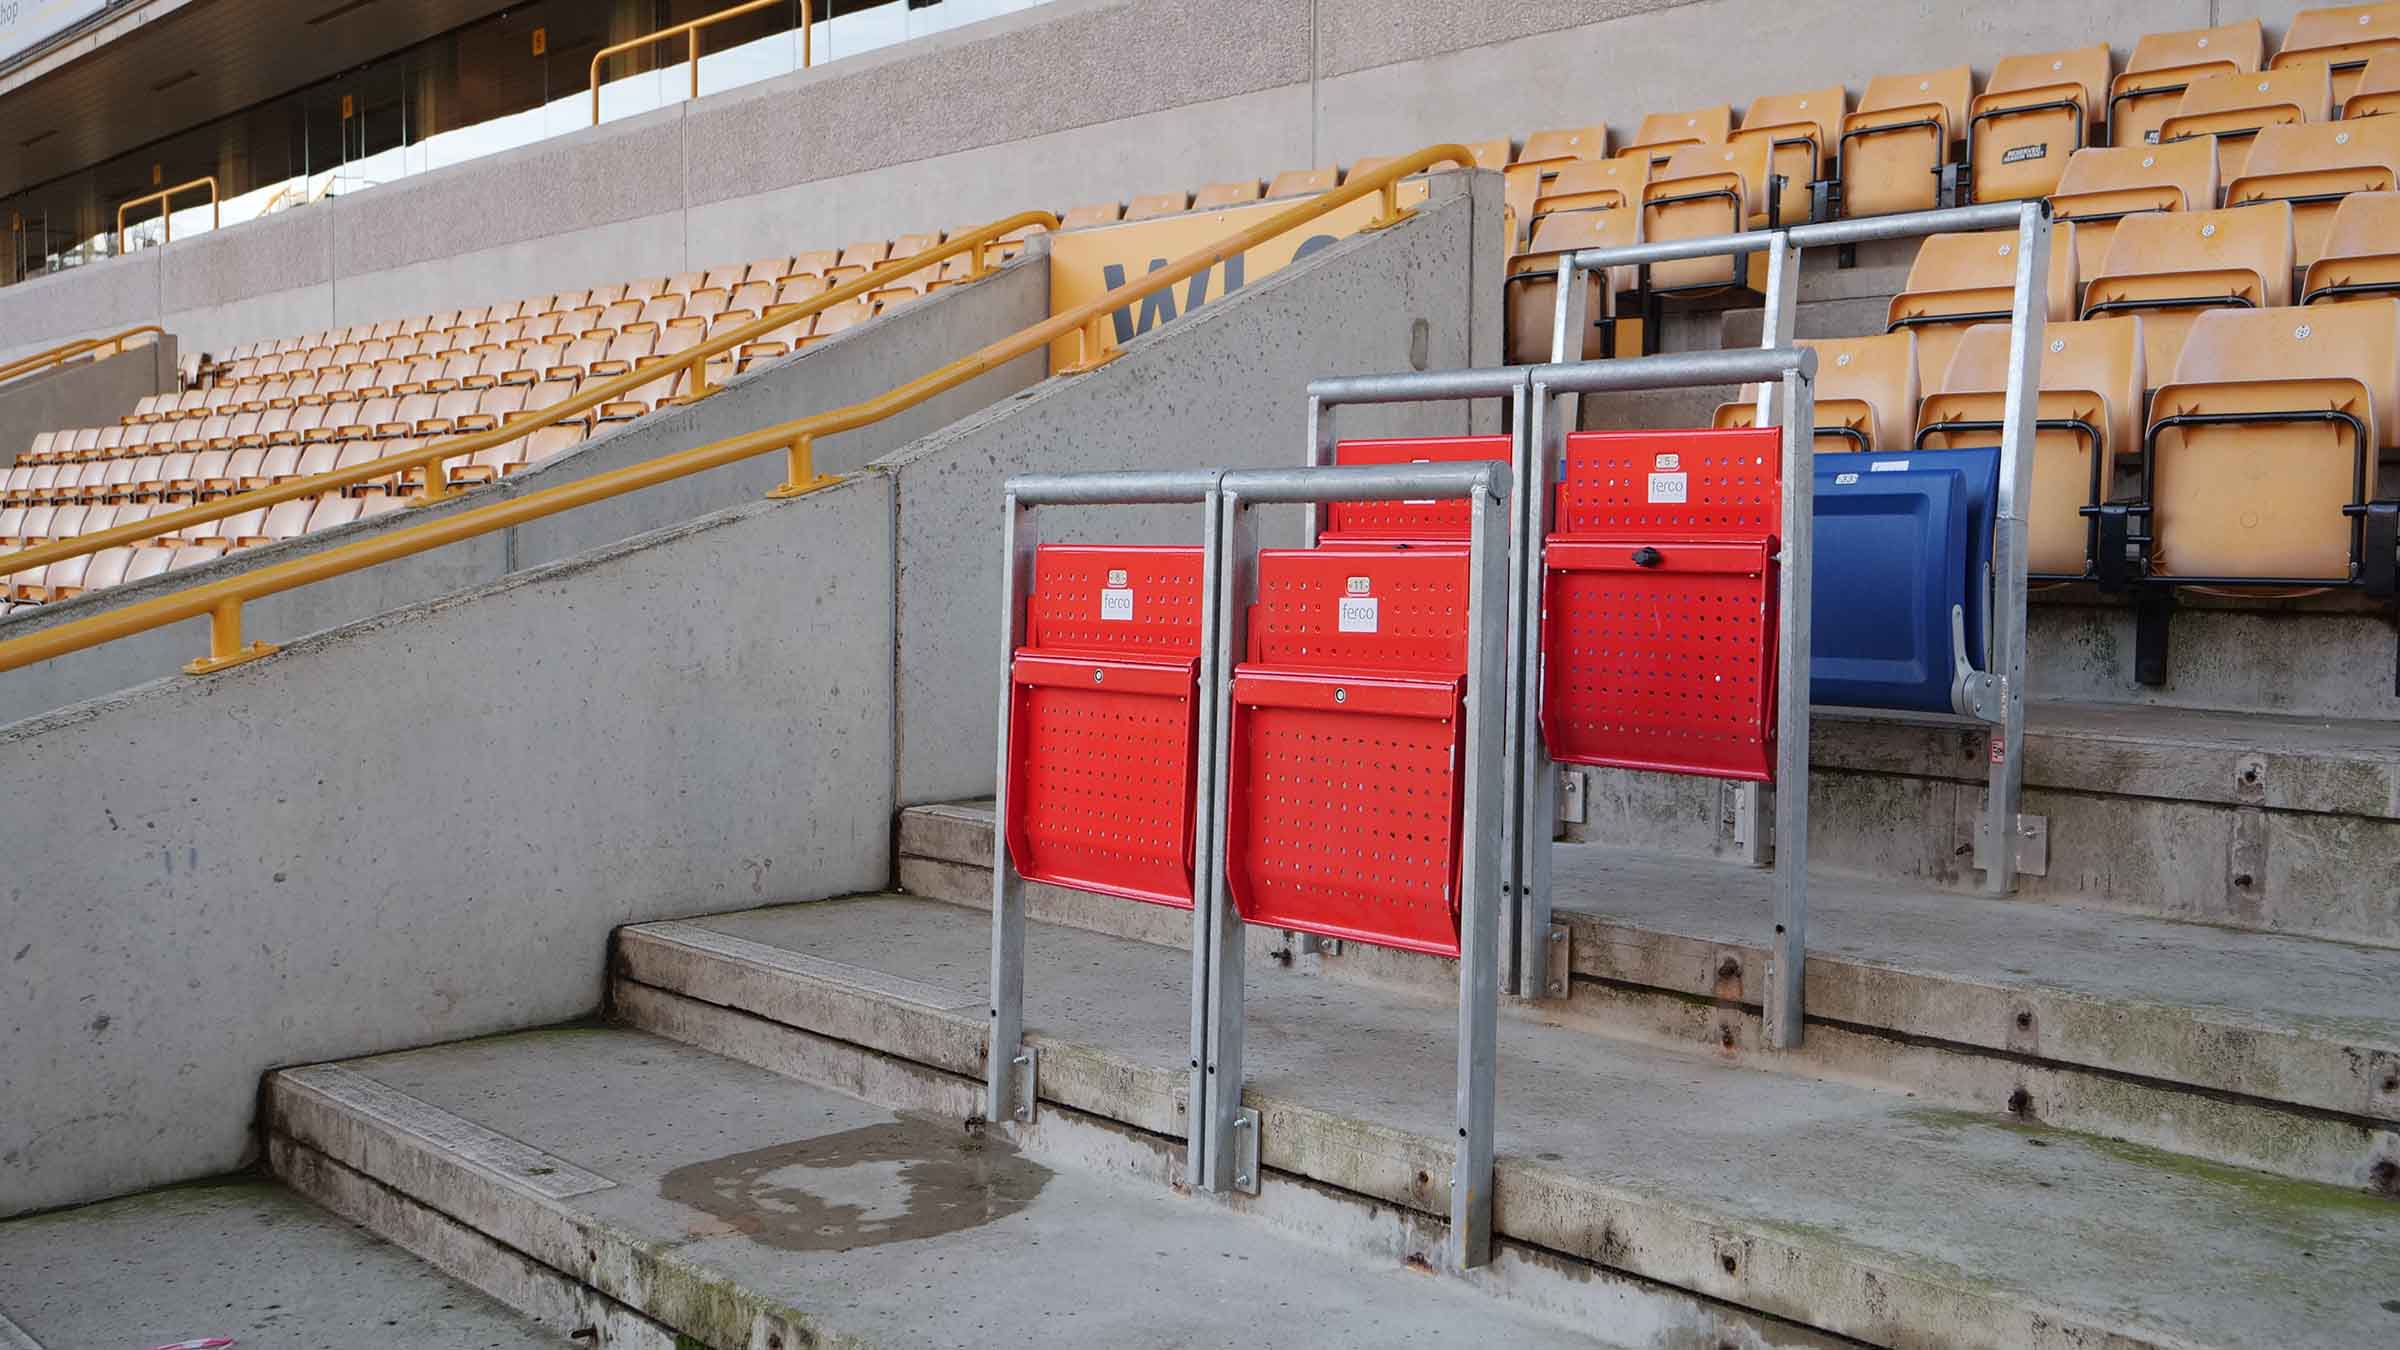 Molineux safe standing